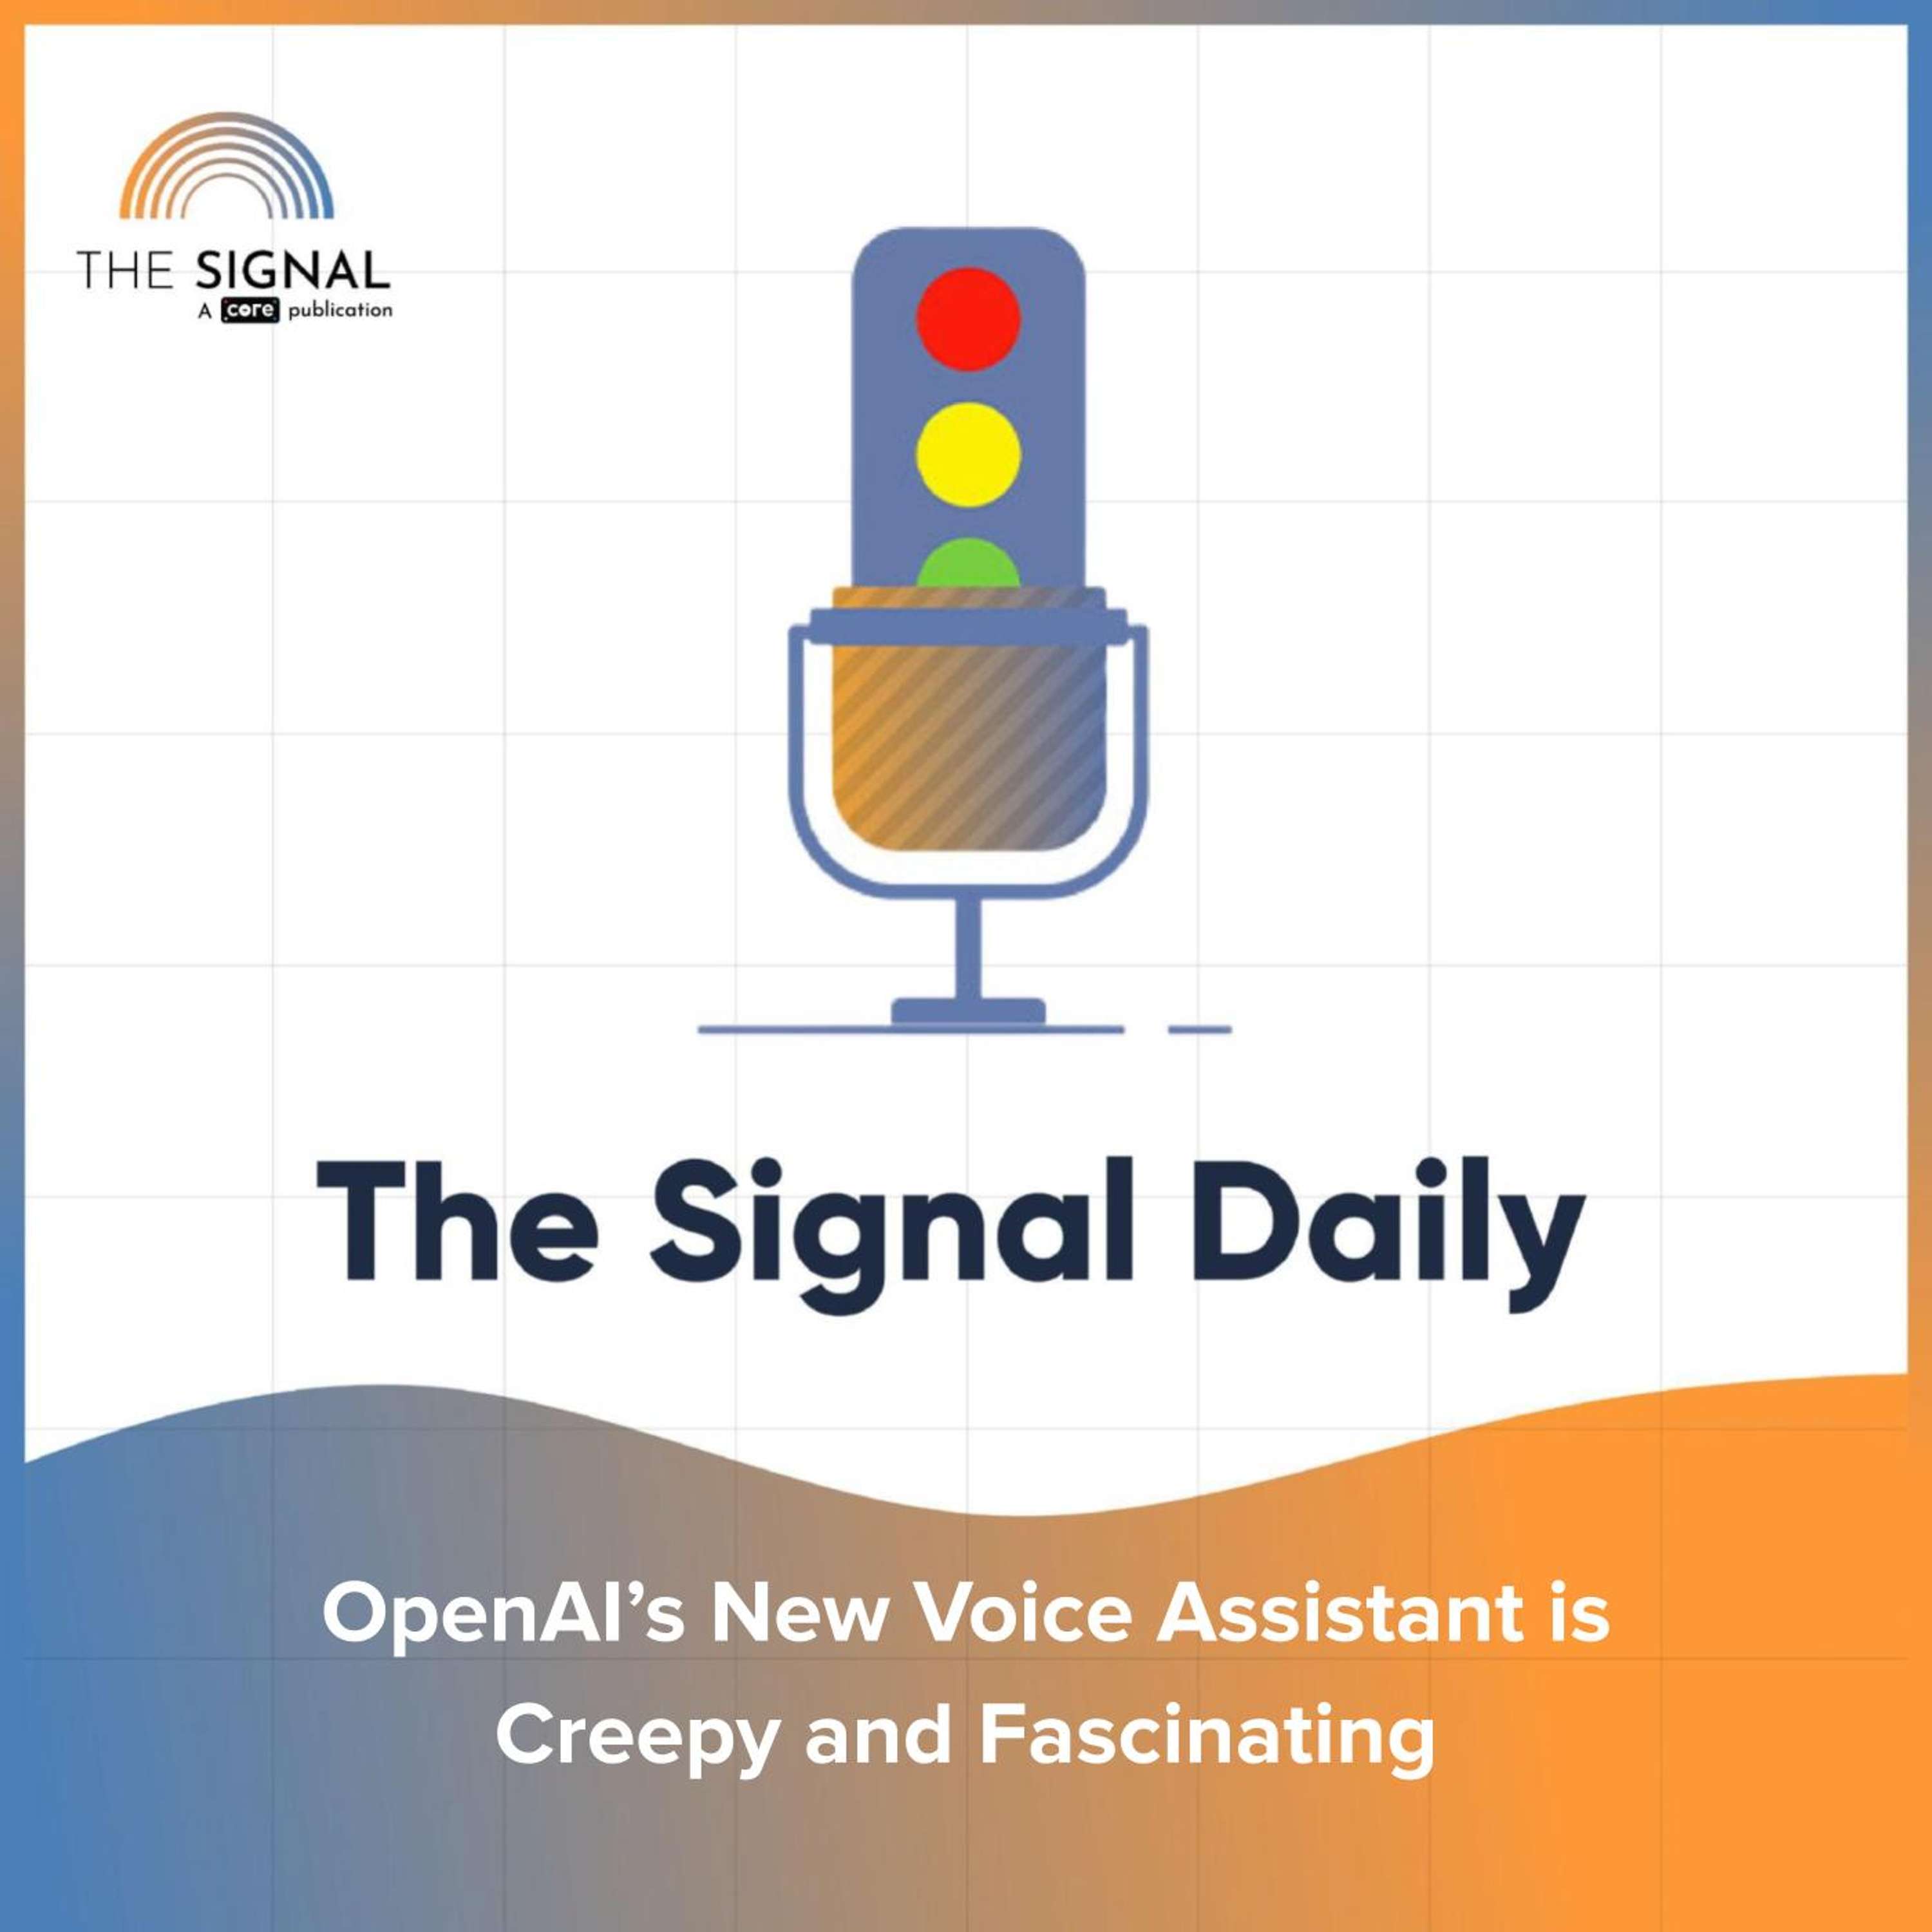 OpenAI’s New Voice Assistant is Creepy and Fascinating